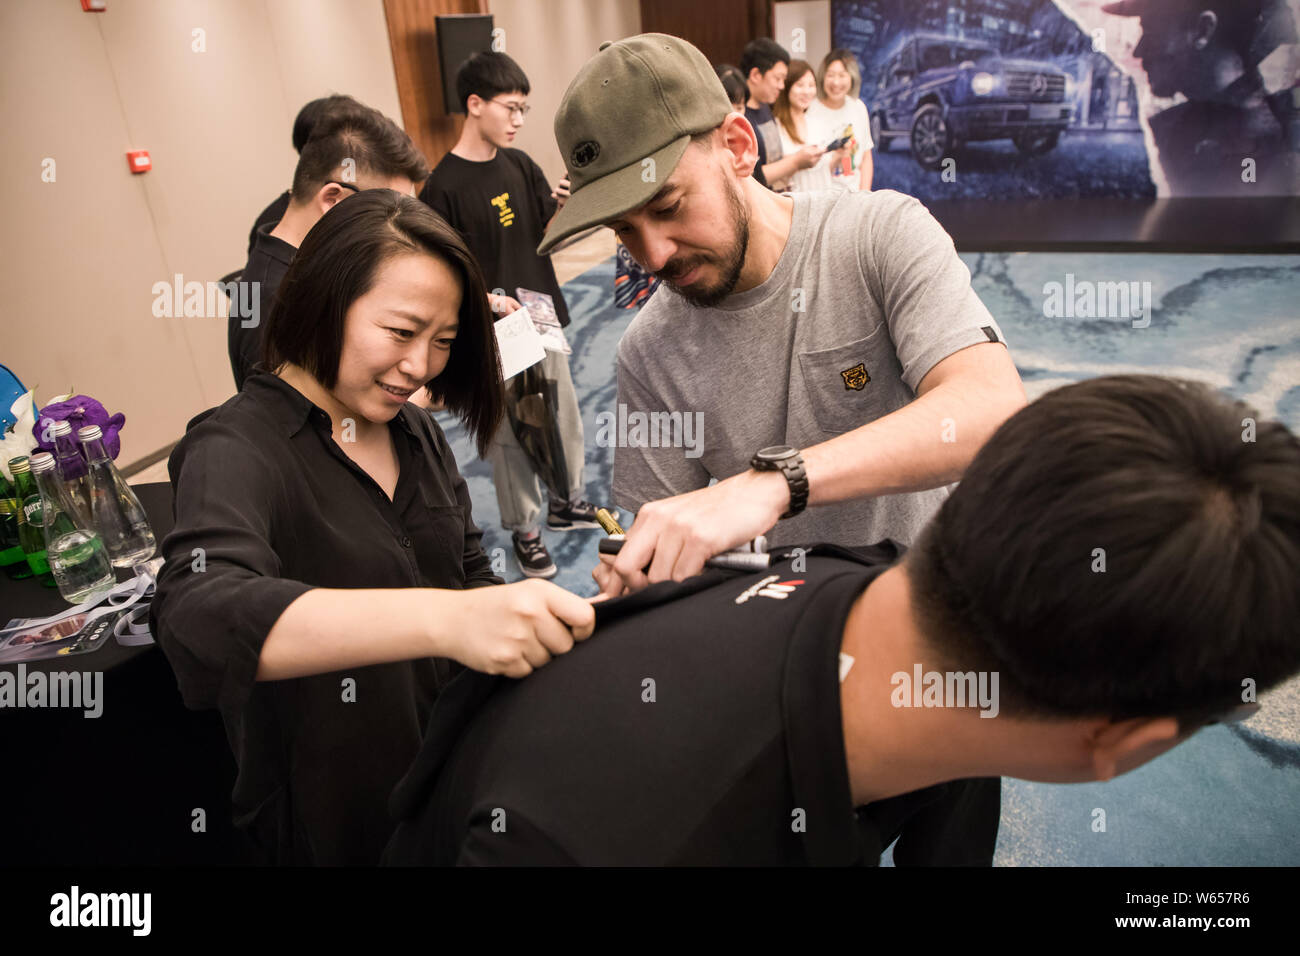 Singer Mike Shinoda of American rock band Linkin Park interacts with fans before a tour concert in Chengdu city, southwest China's Sichuan province, 1 Stock Photo